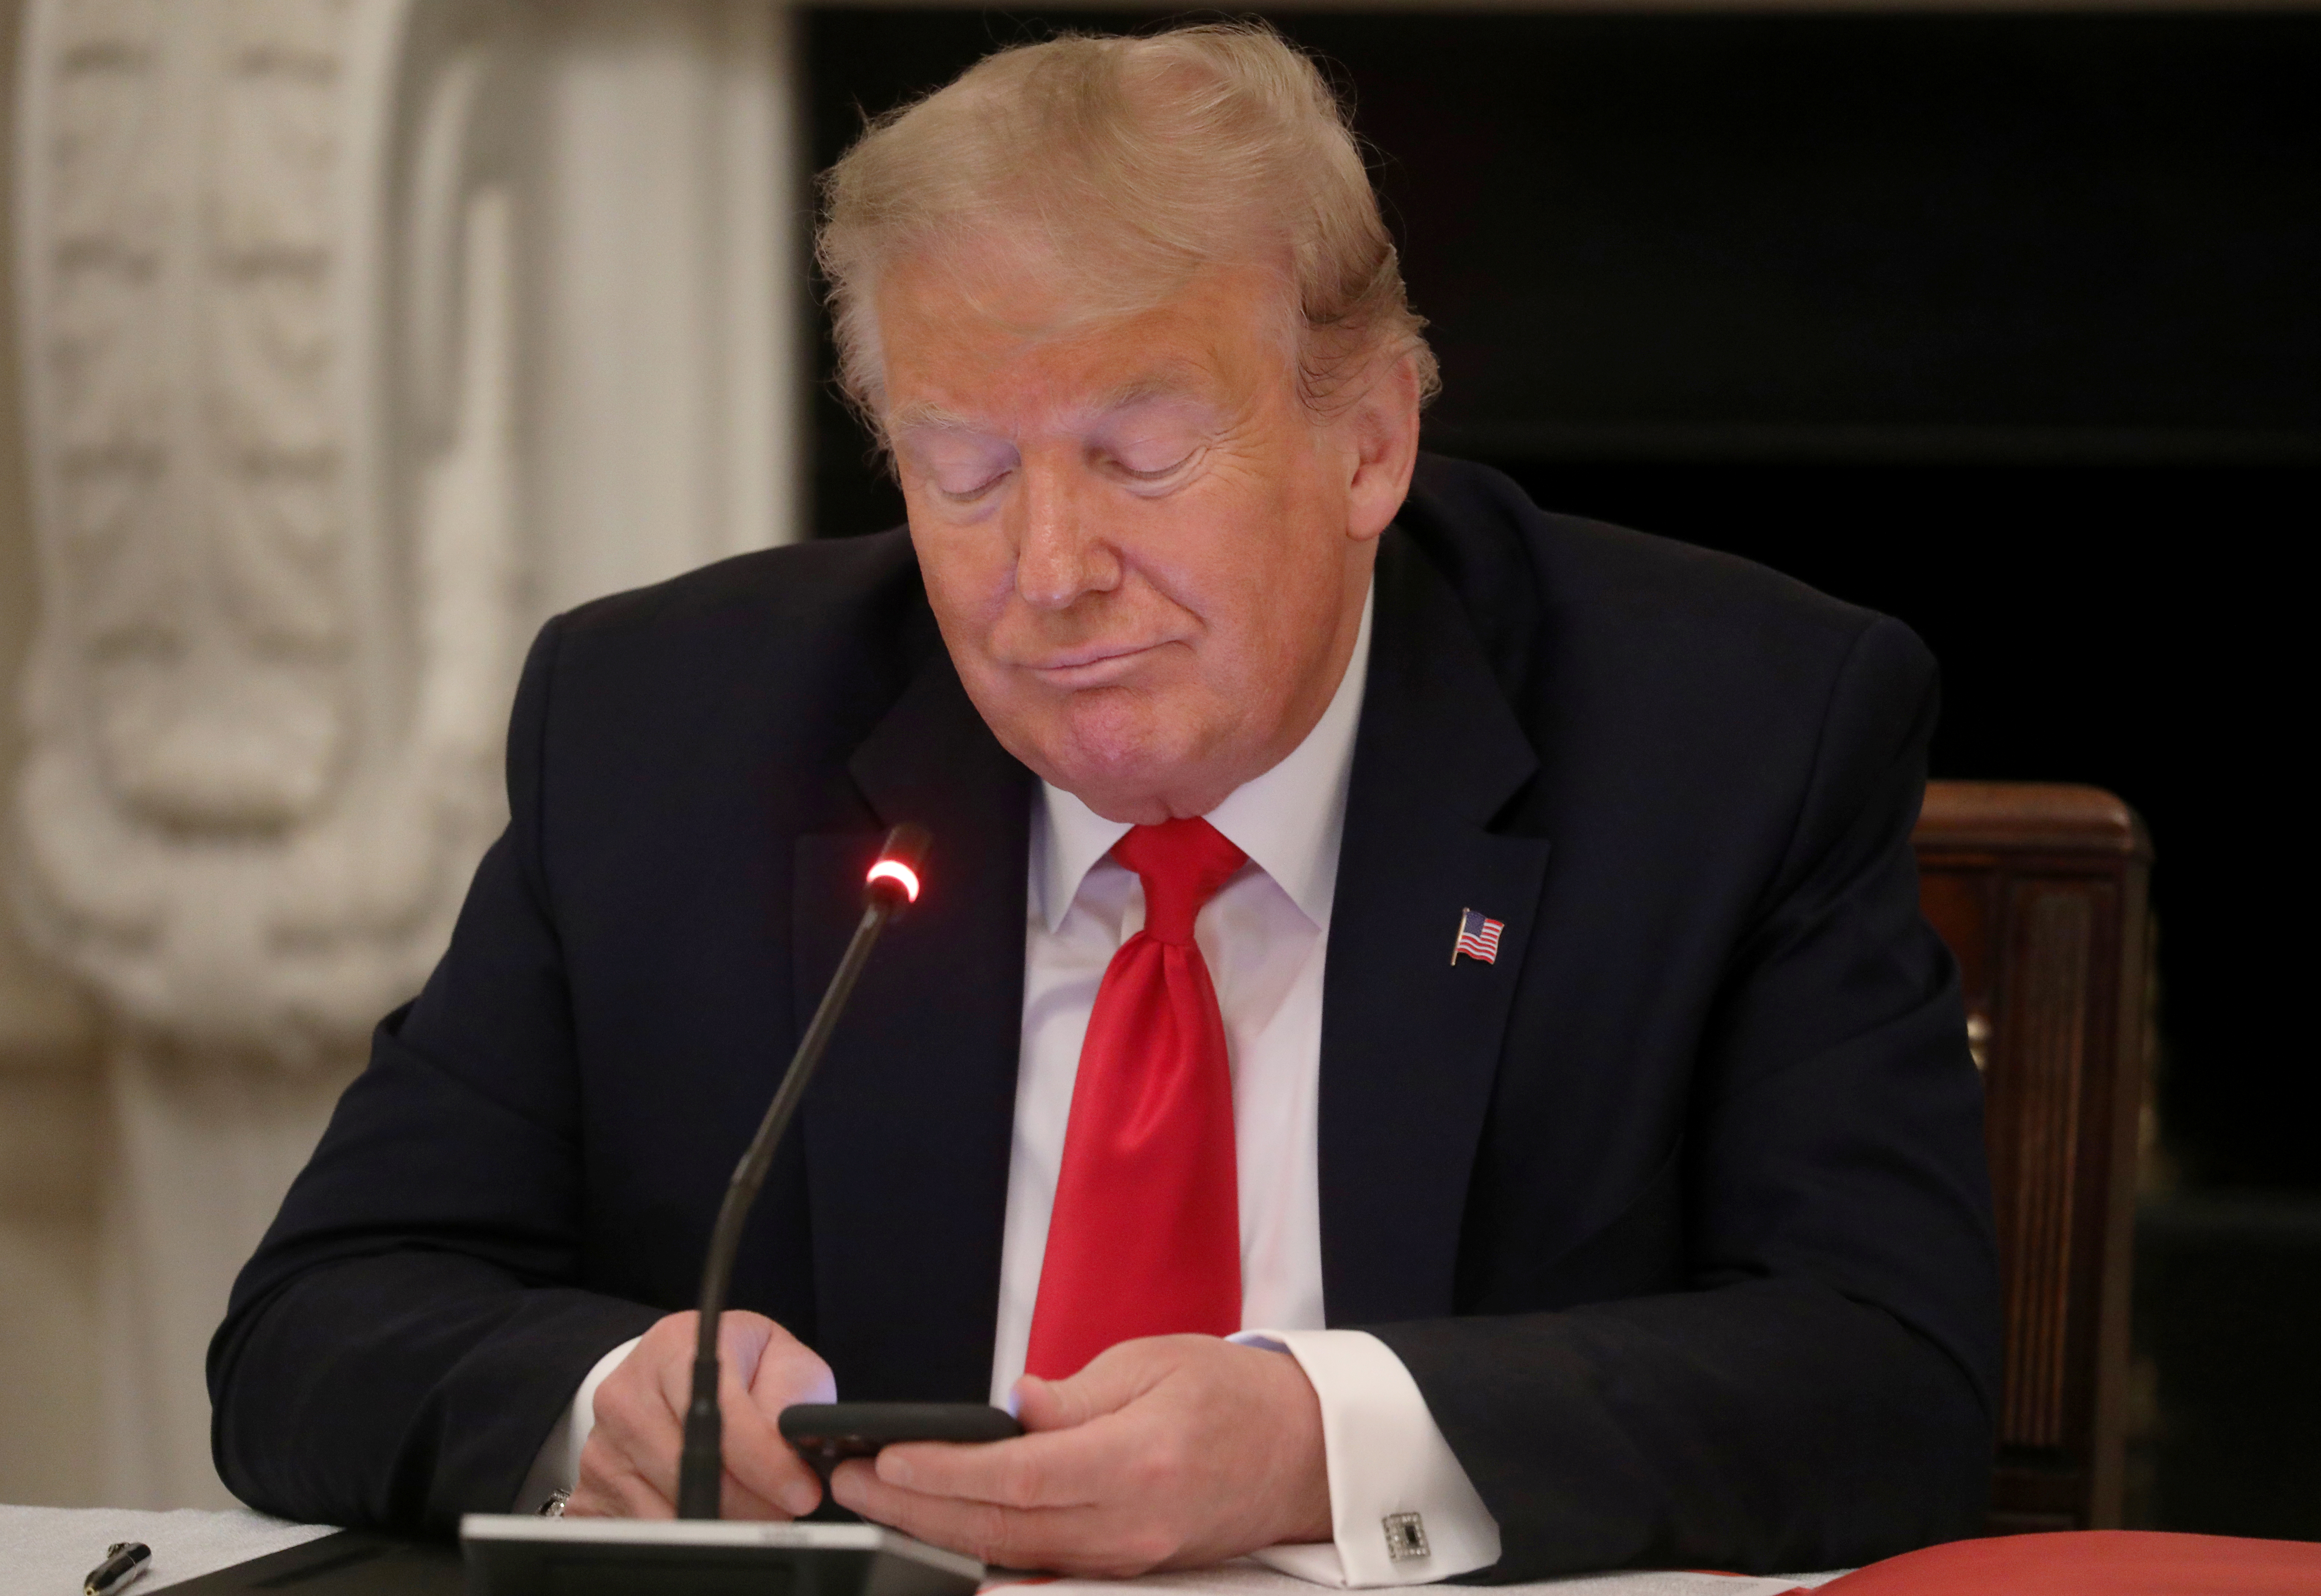 U.S. President Donald Trump is using a mobile phone during a roundtable discussion on the reopening of small businesses in the State Dining Room at the White House in Washington, U.S., June 18, 2020. REUTERS/Leah Millis